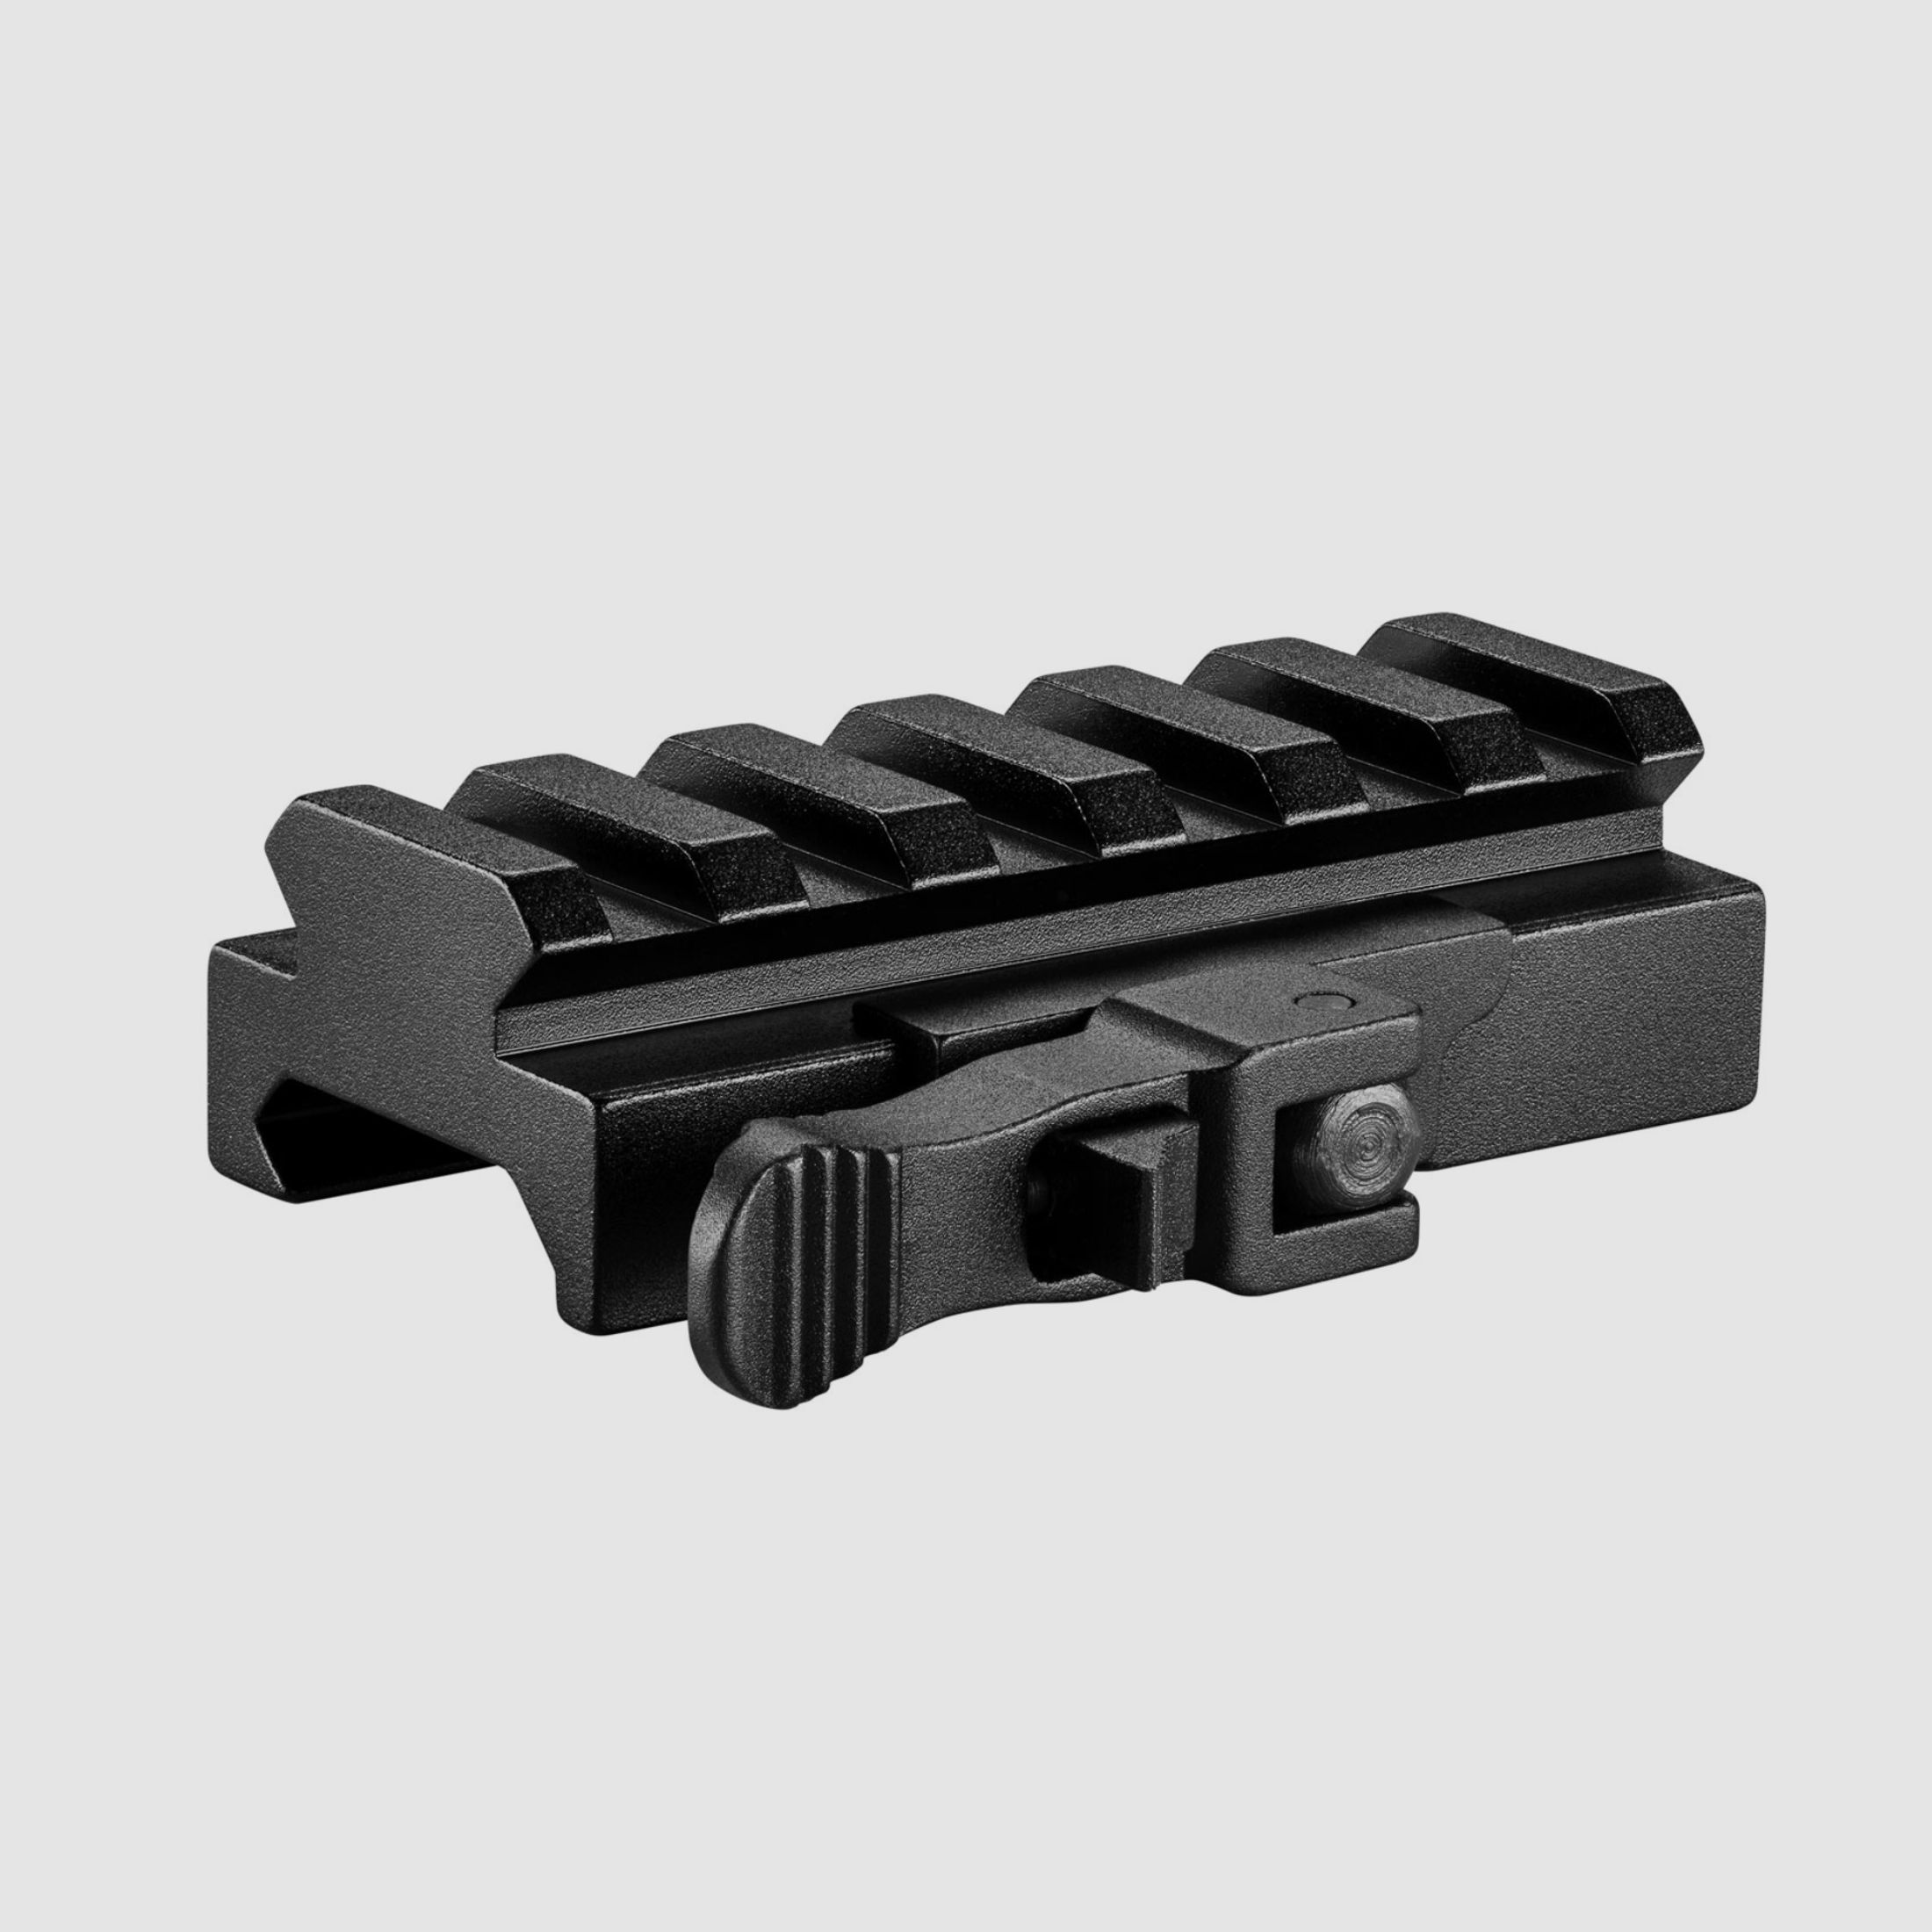 Hawke 22415 RED DOT RISER QUICK RELEASE